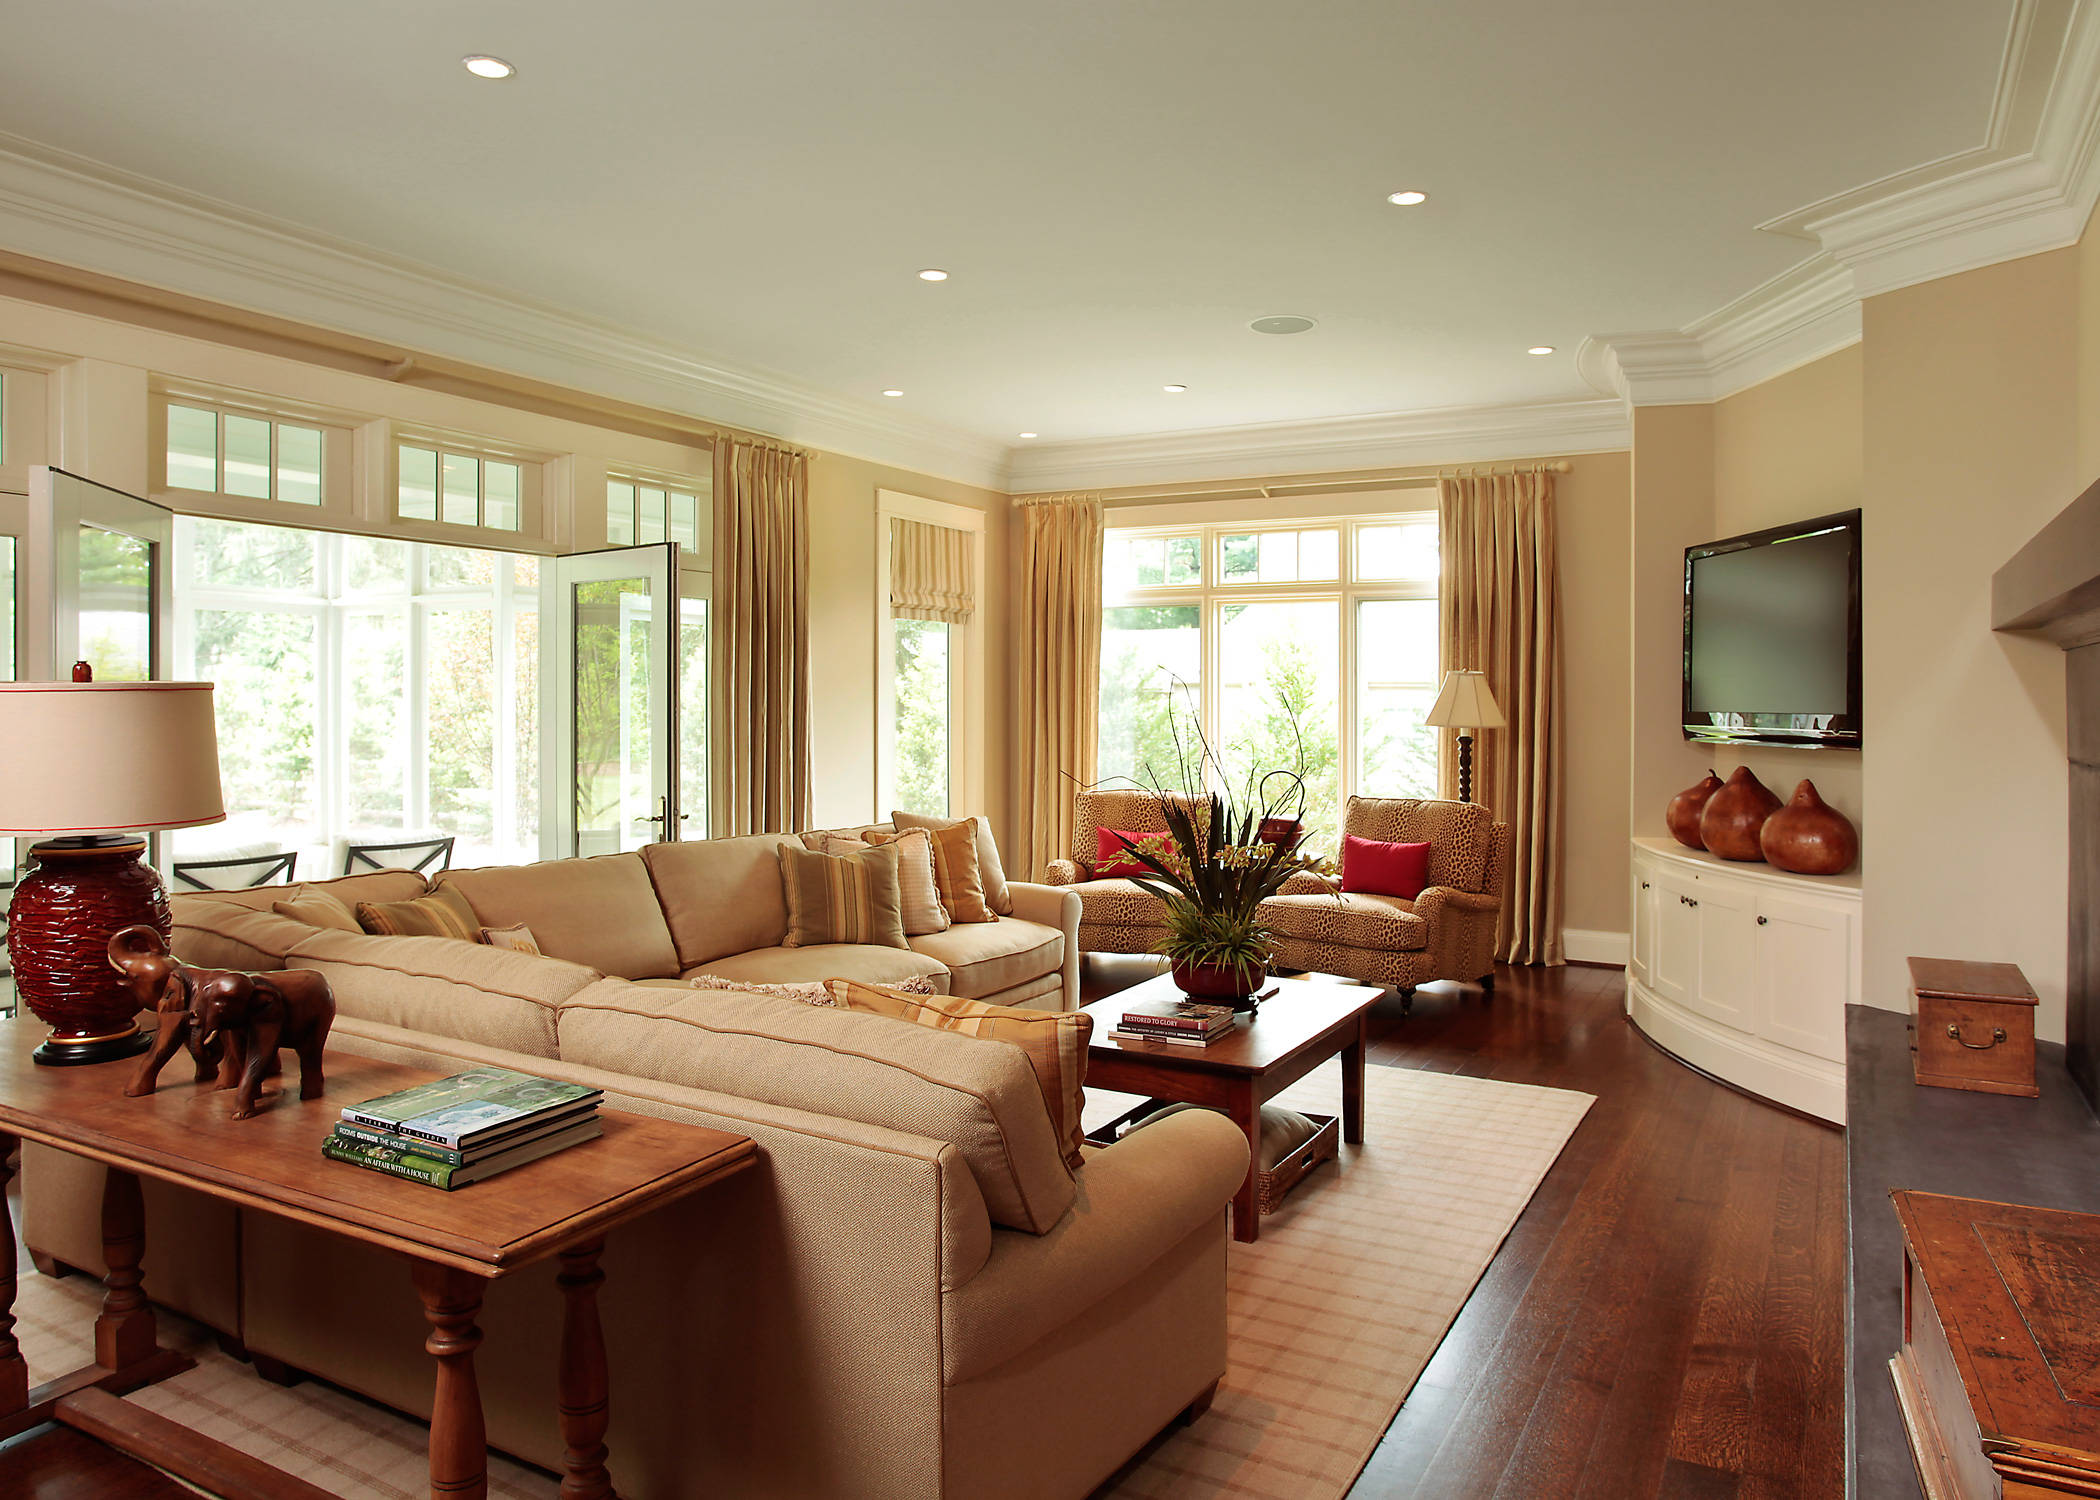 75 Family Room with a Corner TV Ideas You'll Love - December, 2023 | Houzz